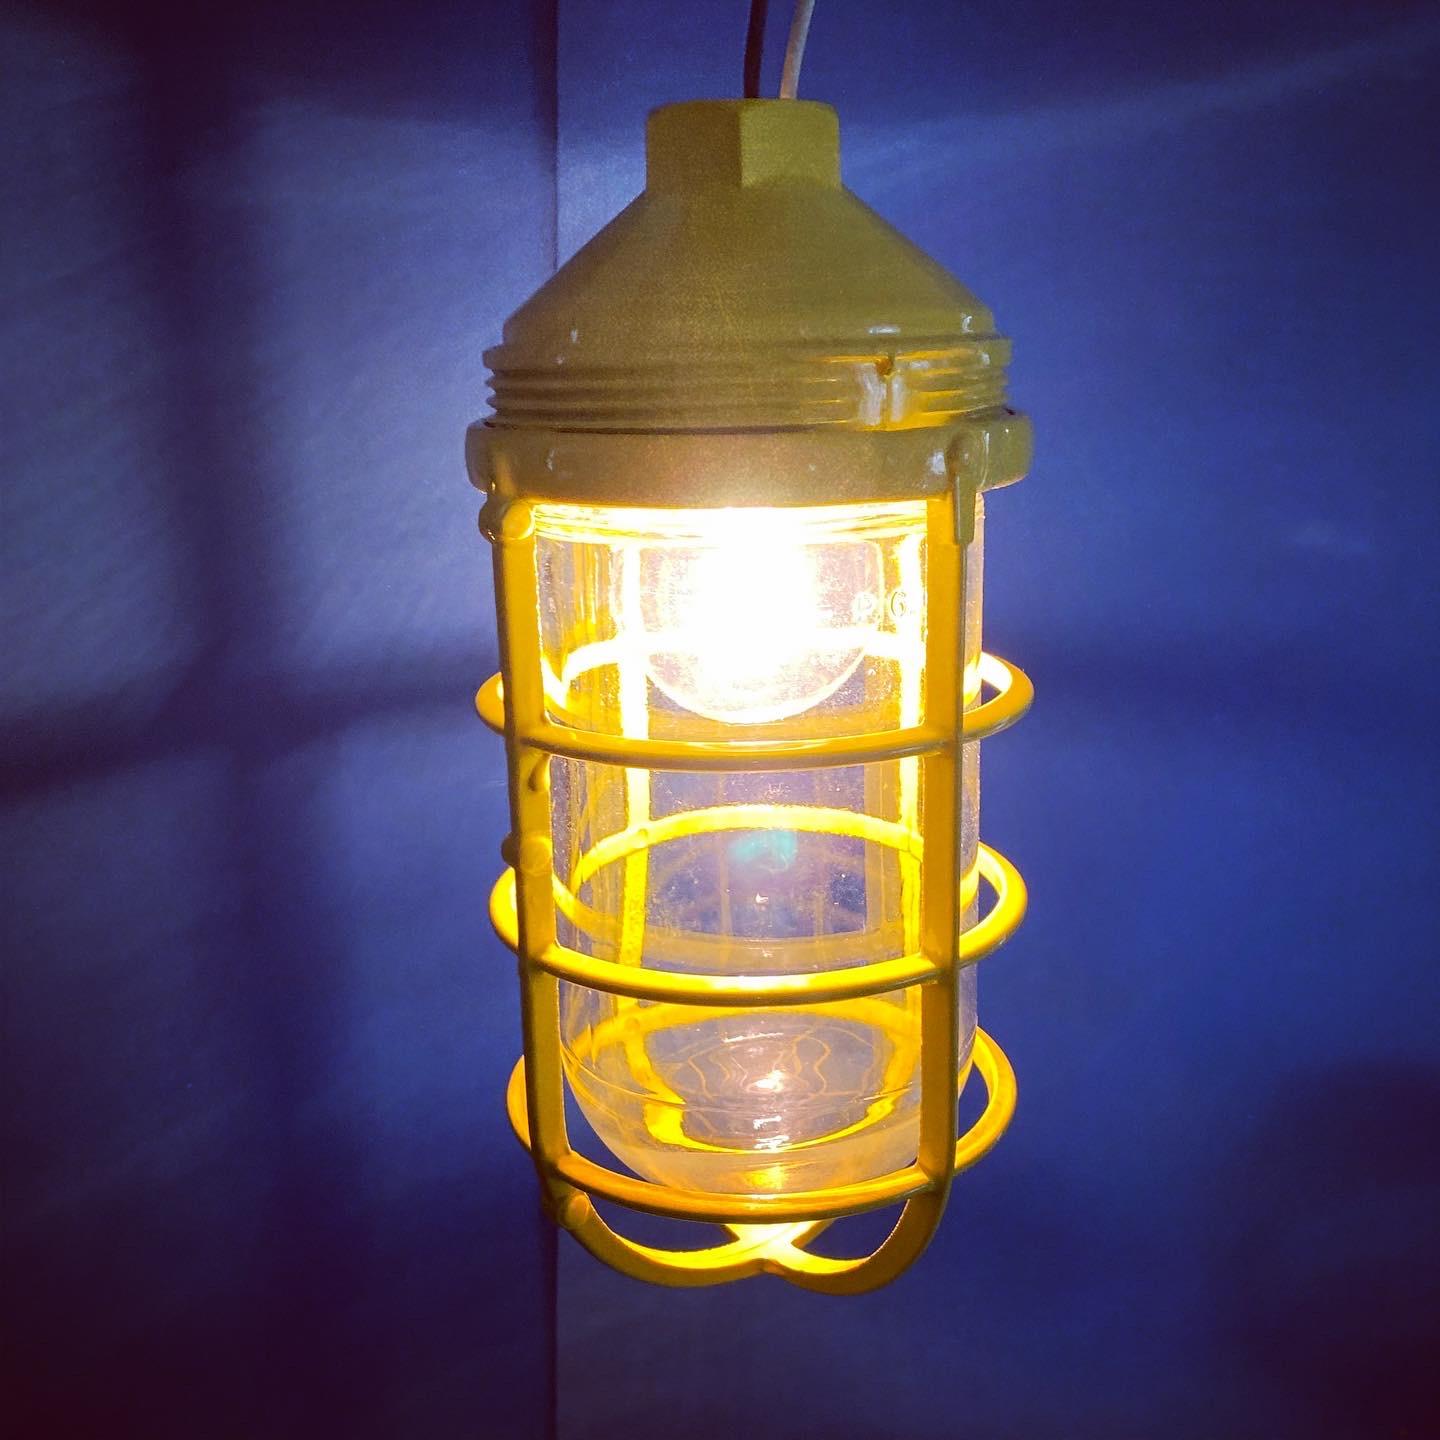 Cast 3 Yellow Salvaged Industrial Three-Light Blast Proof Ceiling Fixtures